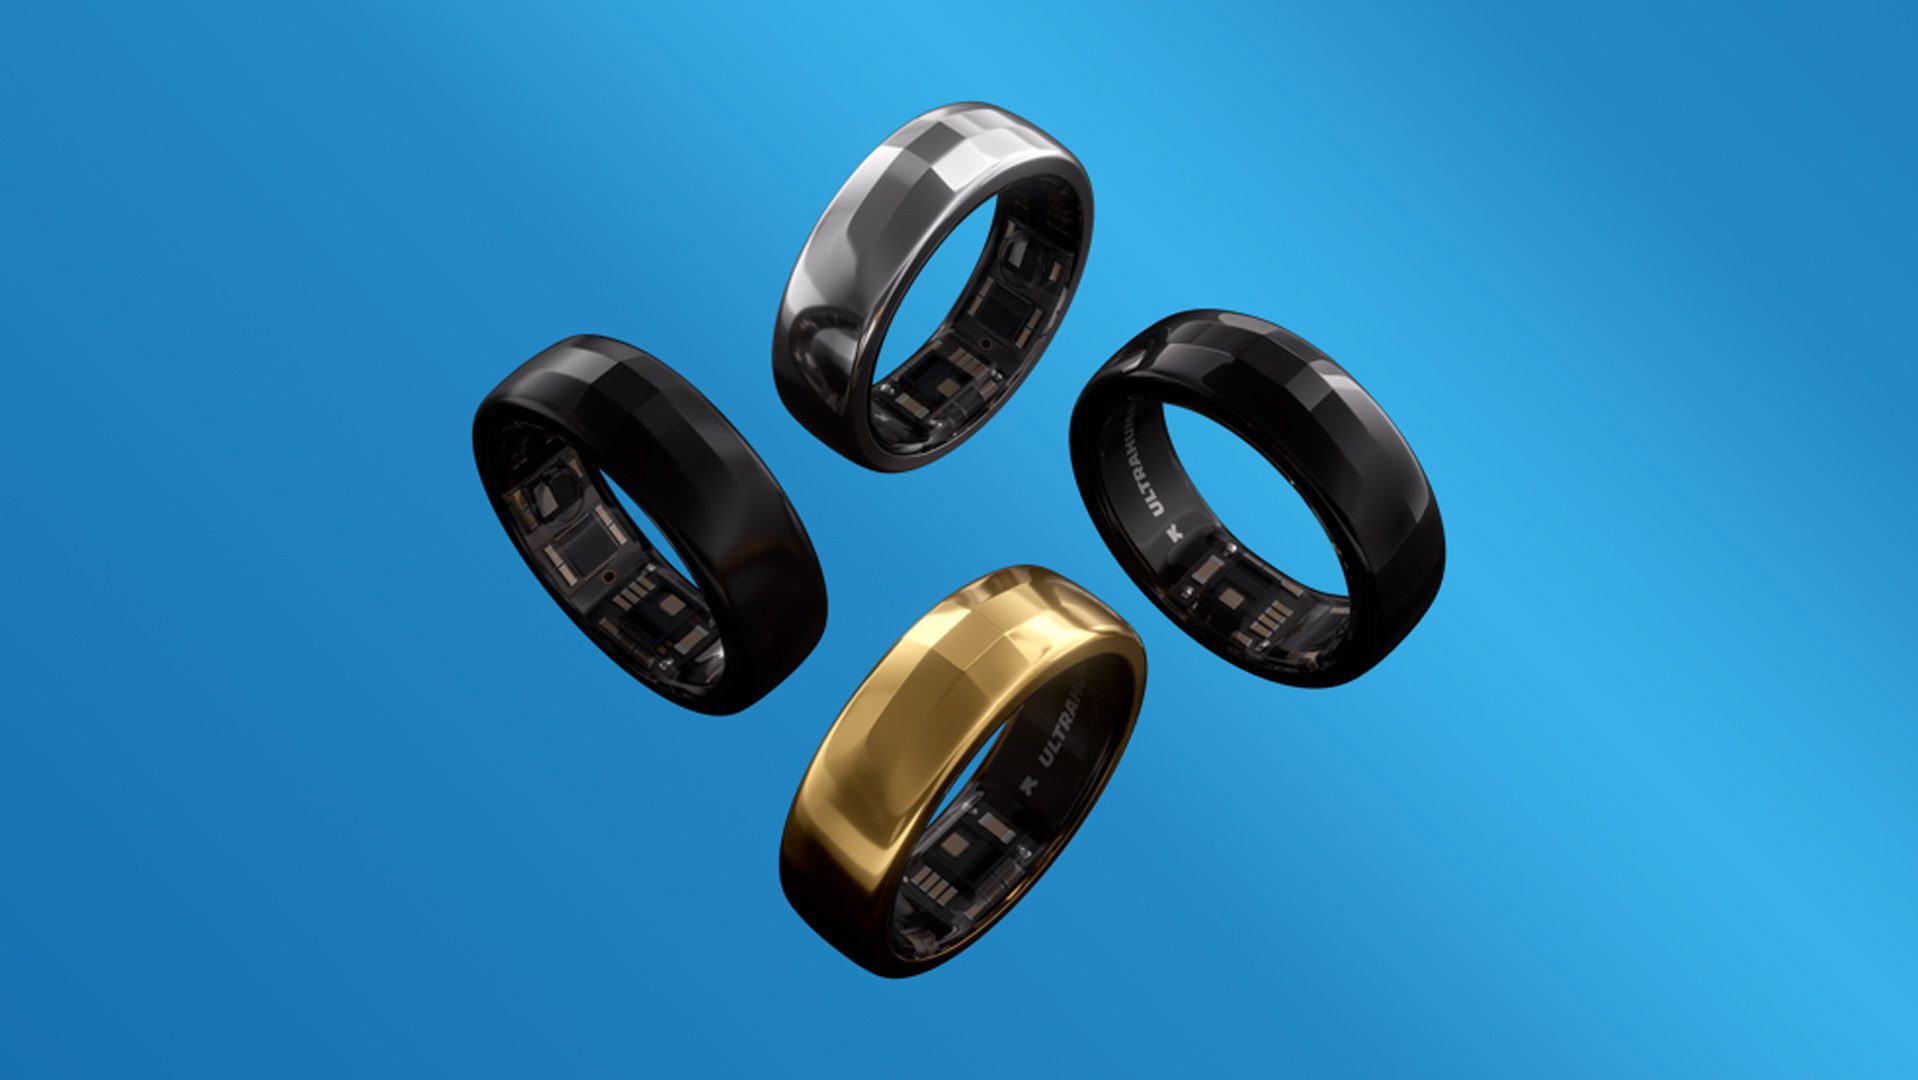 Oura Ring Arrives on Amazon Ahead of Samsung's Galaxy Ring Launch - CNET